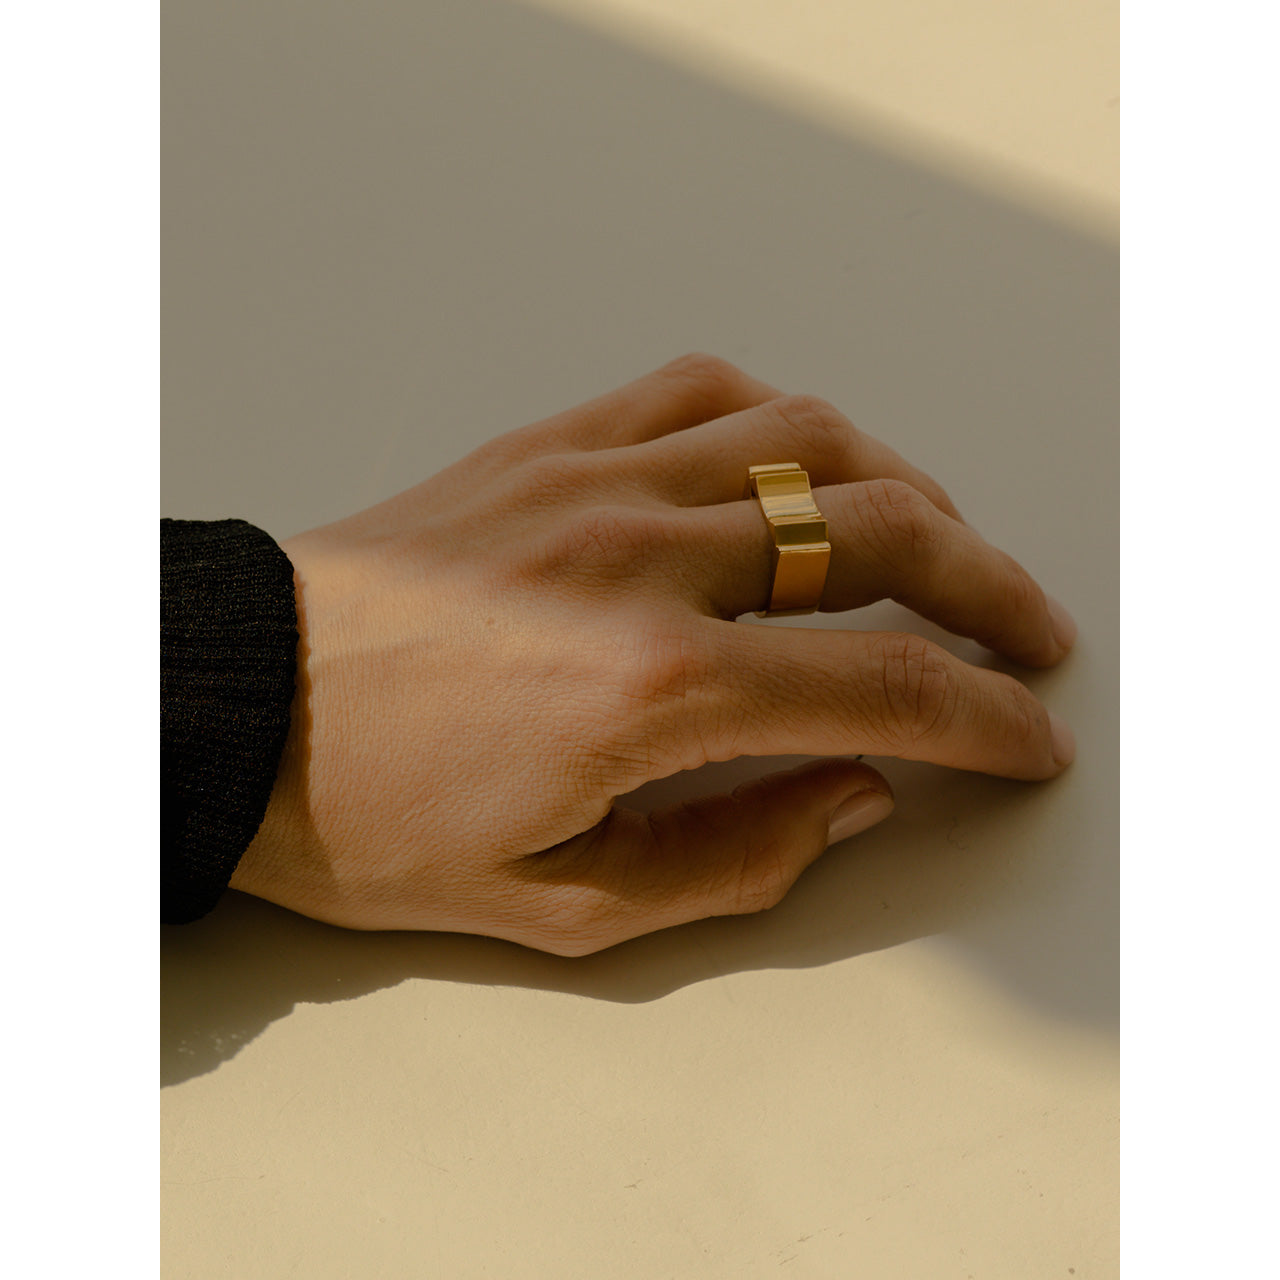 This chunky U-shaped ring draws inspiration from the robust signet rings of the past.